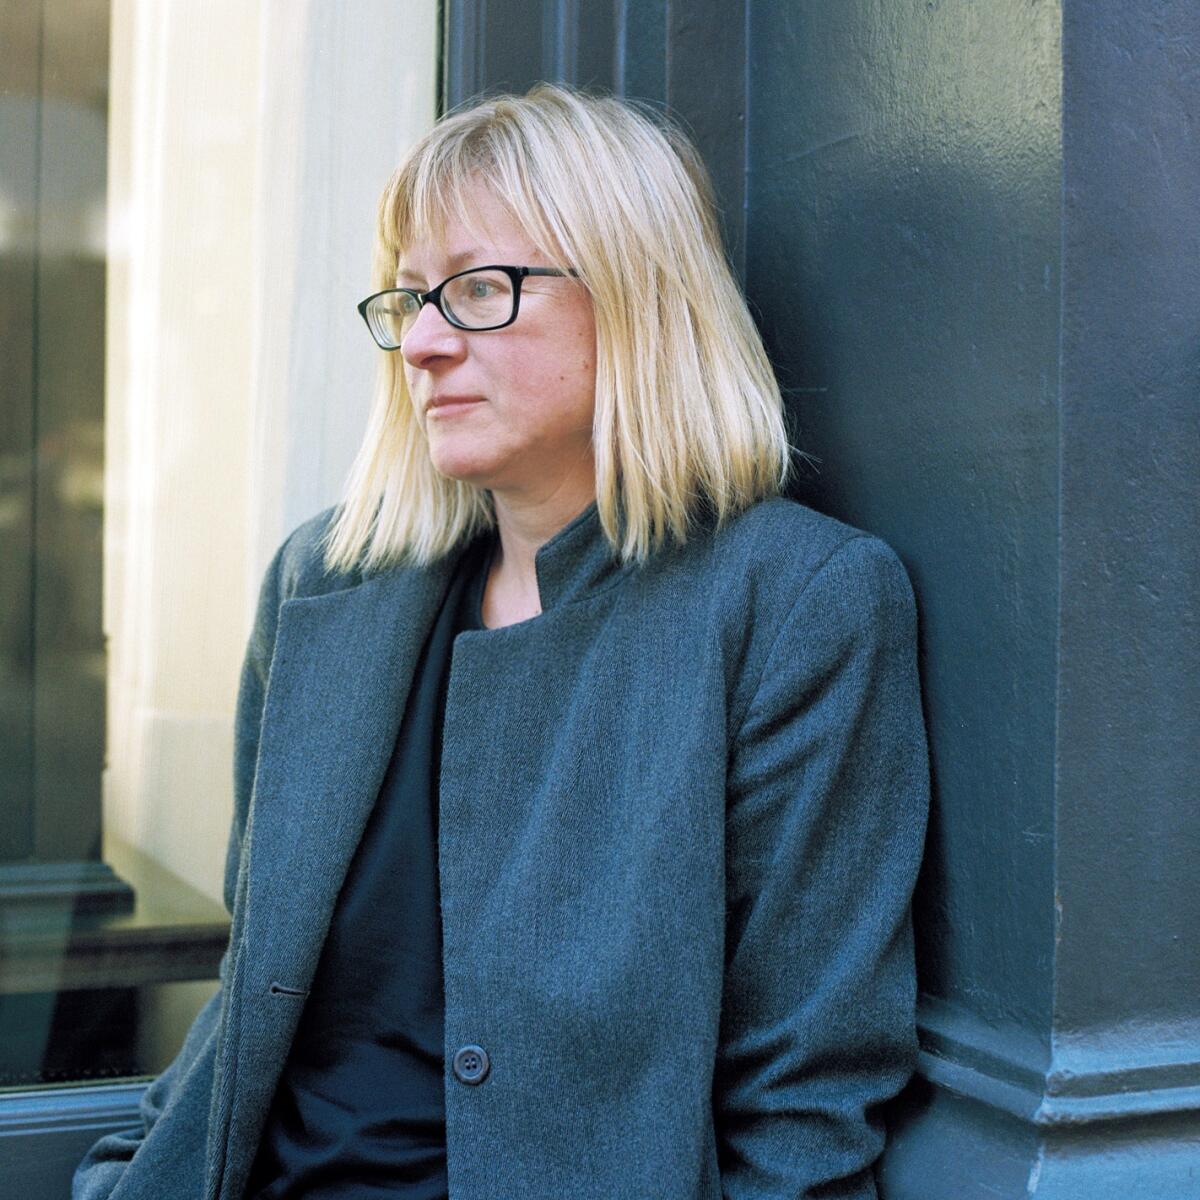 A blond woman with black glasses and a gray coat leans against a wall.